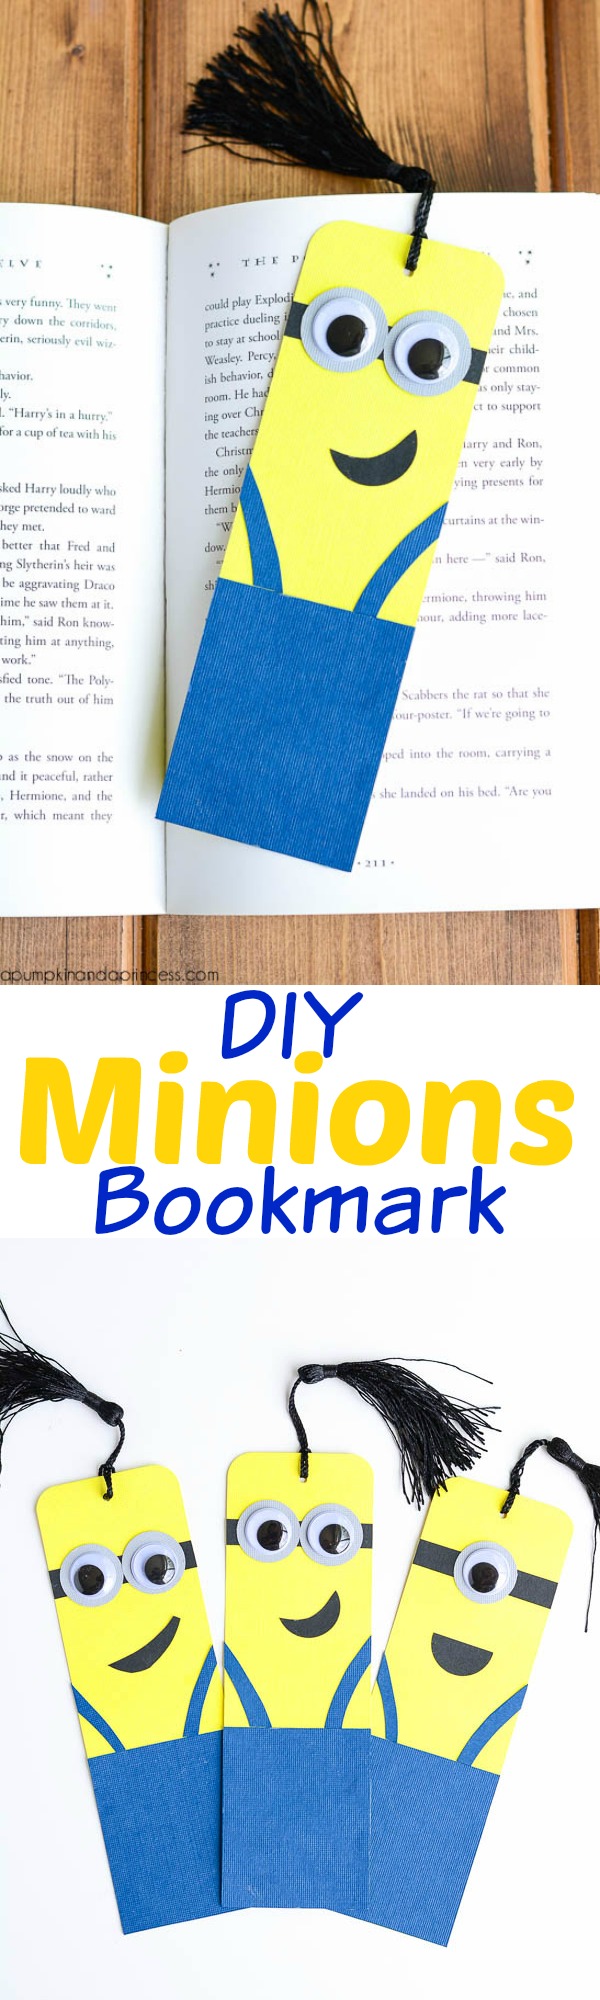 How to make Minions Bookmarks